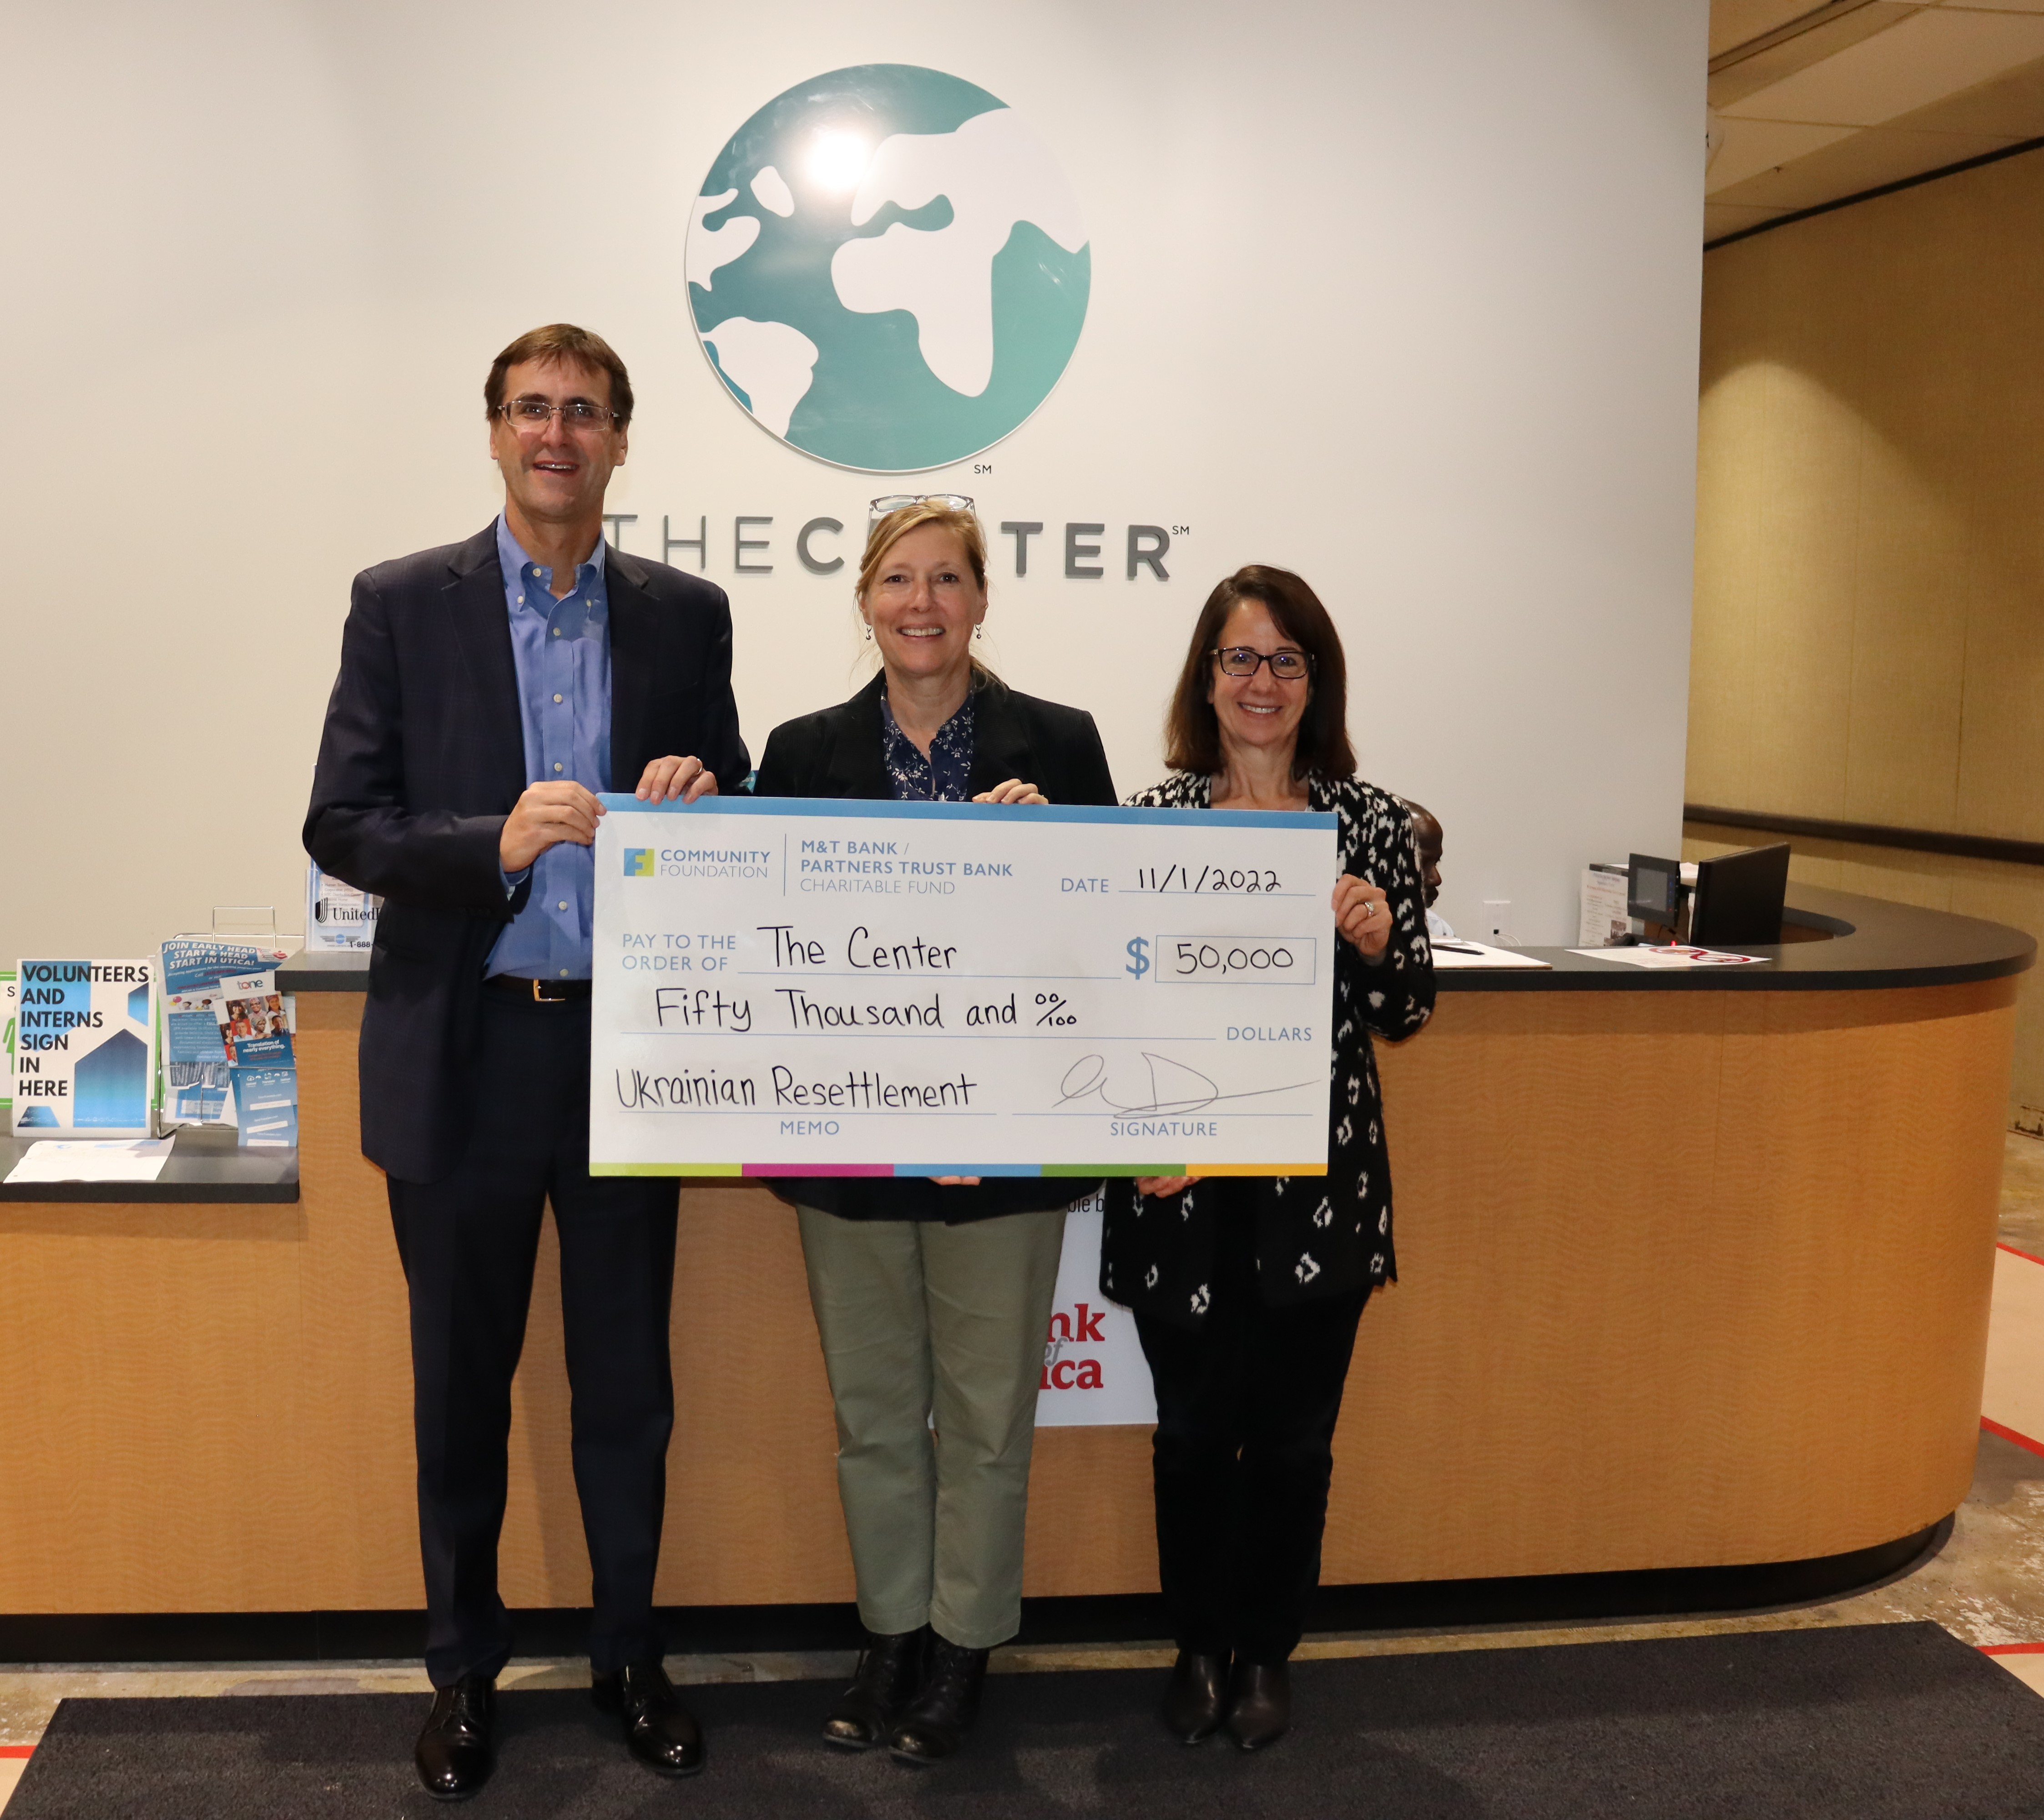 M&T Bank/Partners Trust Bank Fund Awards $50,000 to Support Ukrainian Resettlement Efforts